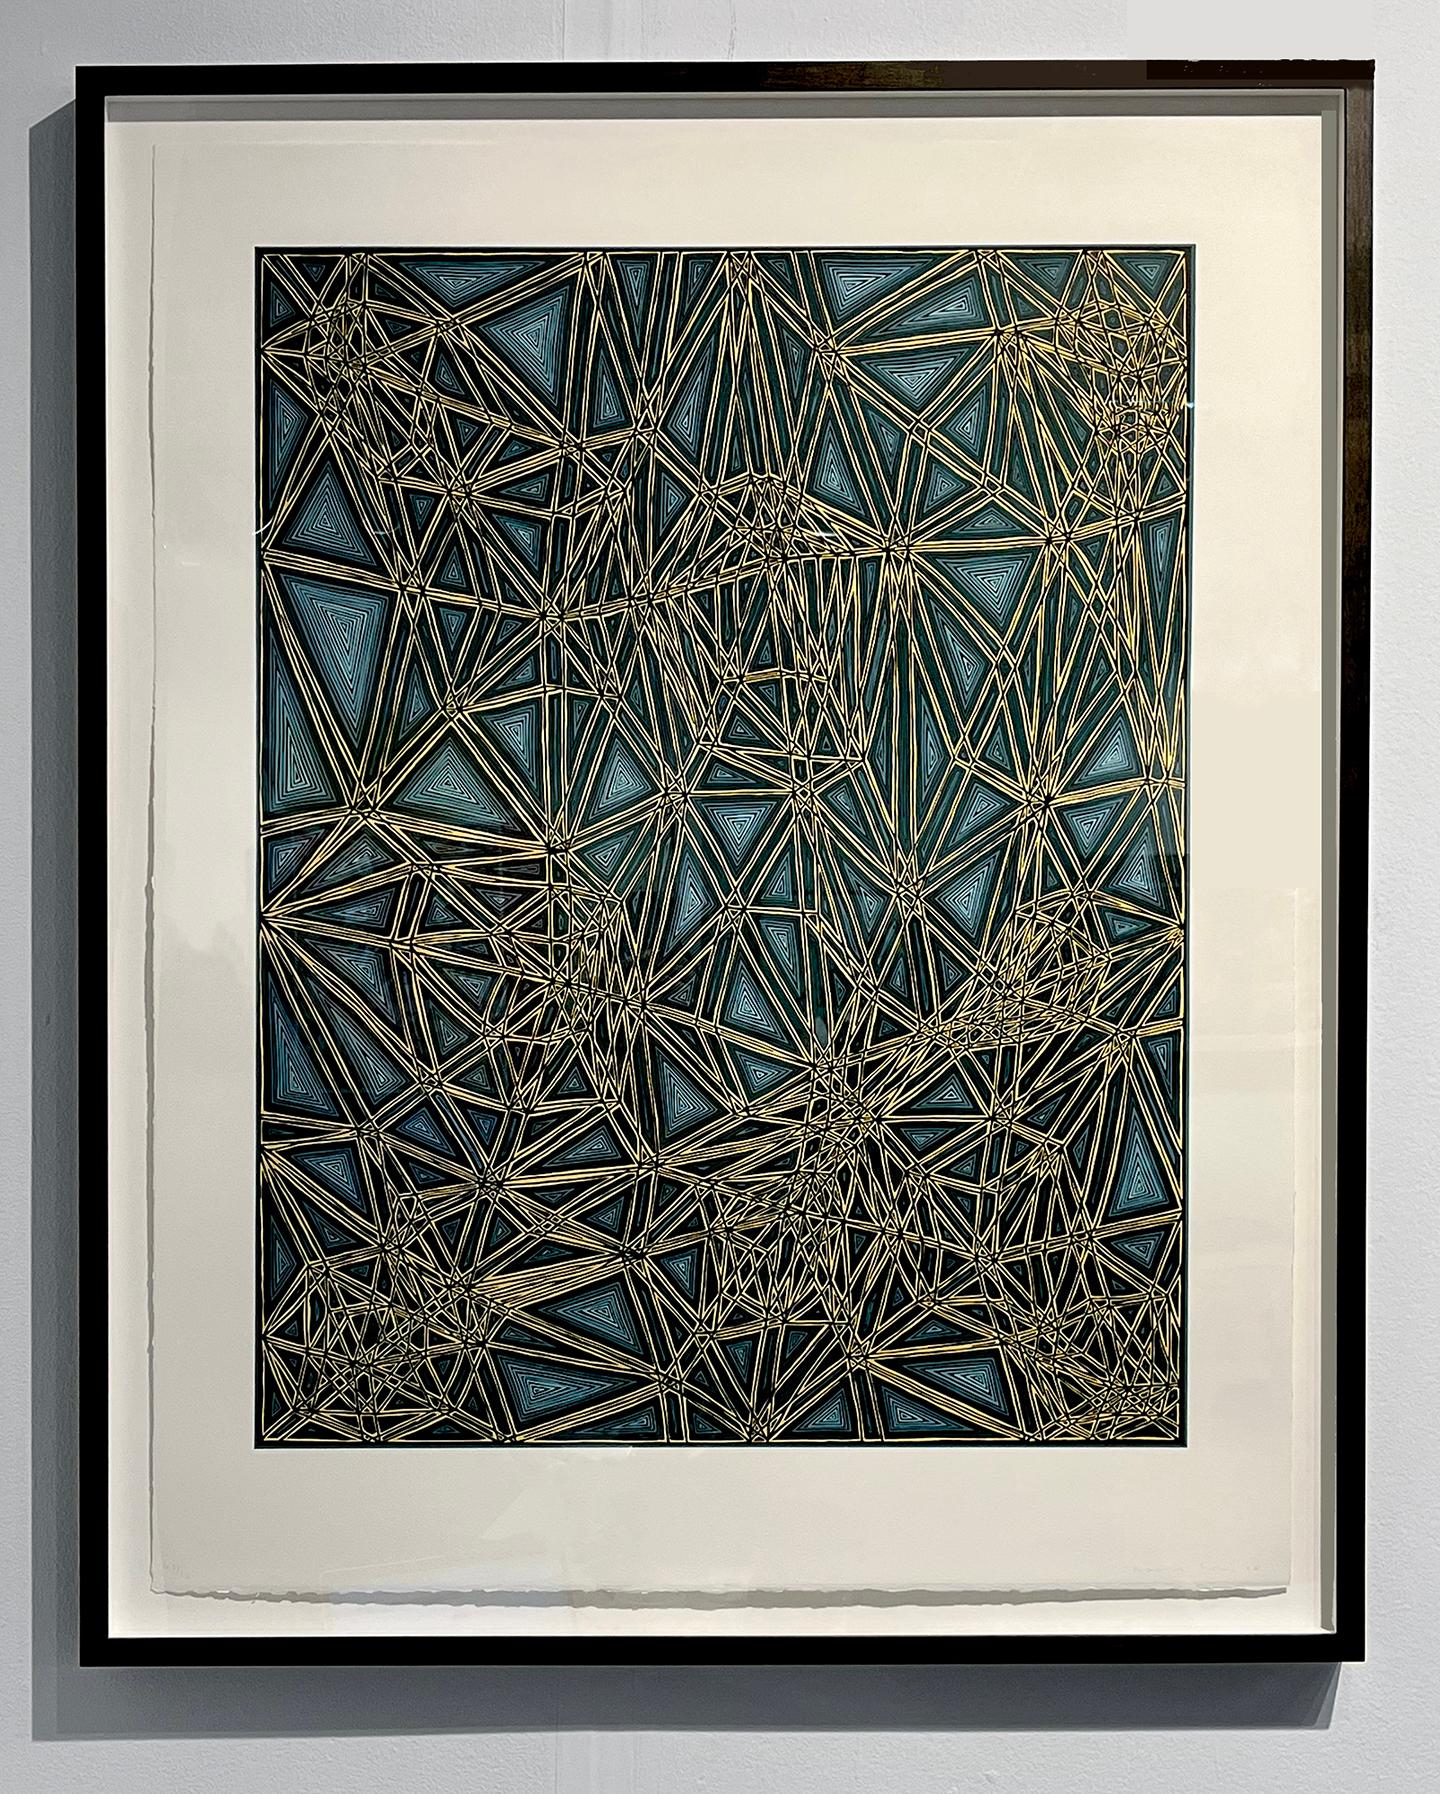 This is a fourteen (14) color screen print on Reeves textured rag paper, hand signed and numbered in graphite from an edition of 118. There are an additional 18 Artist Proofs. The print was inspired from an enamel painting of the same name, which